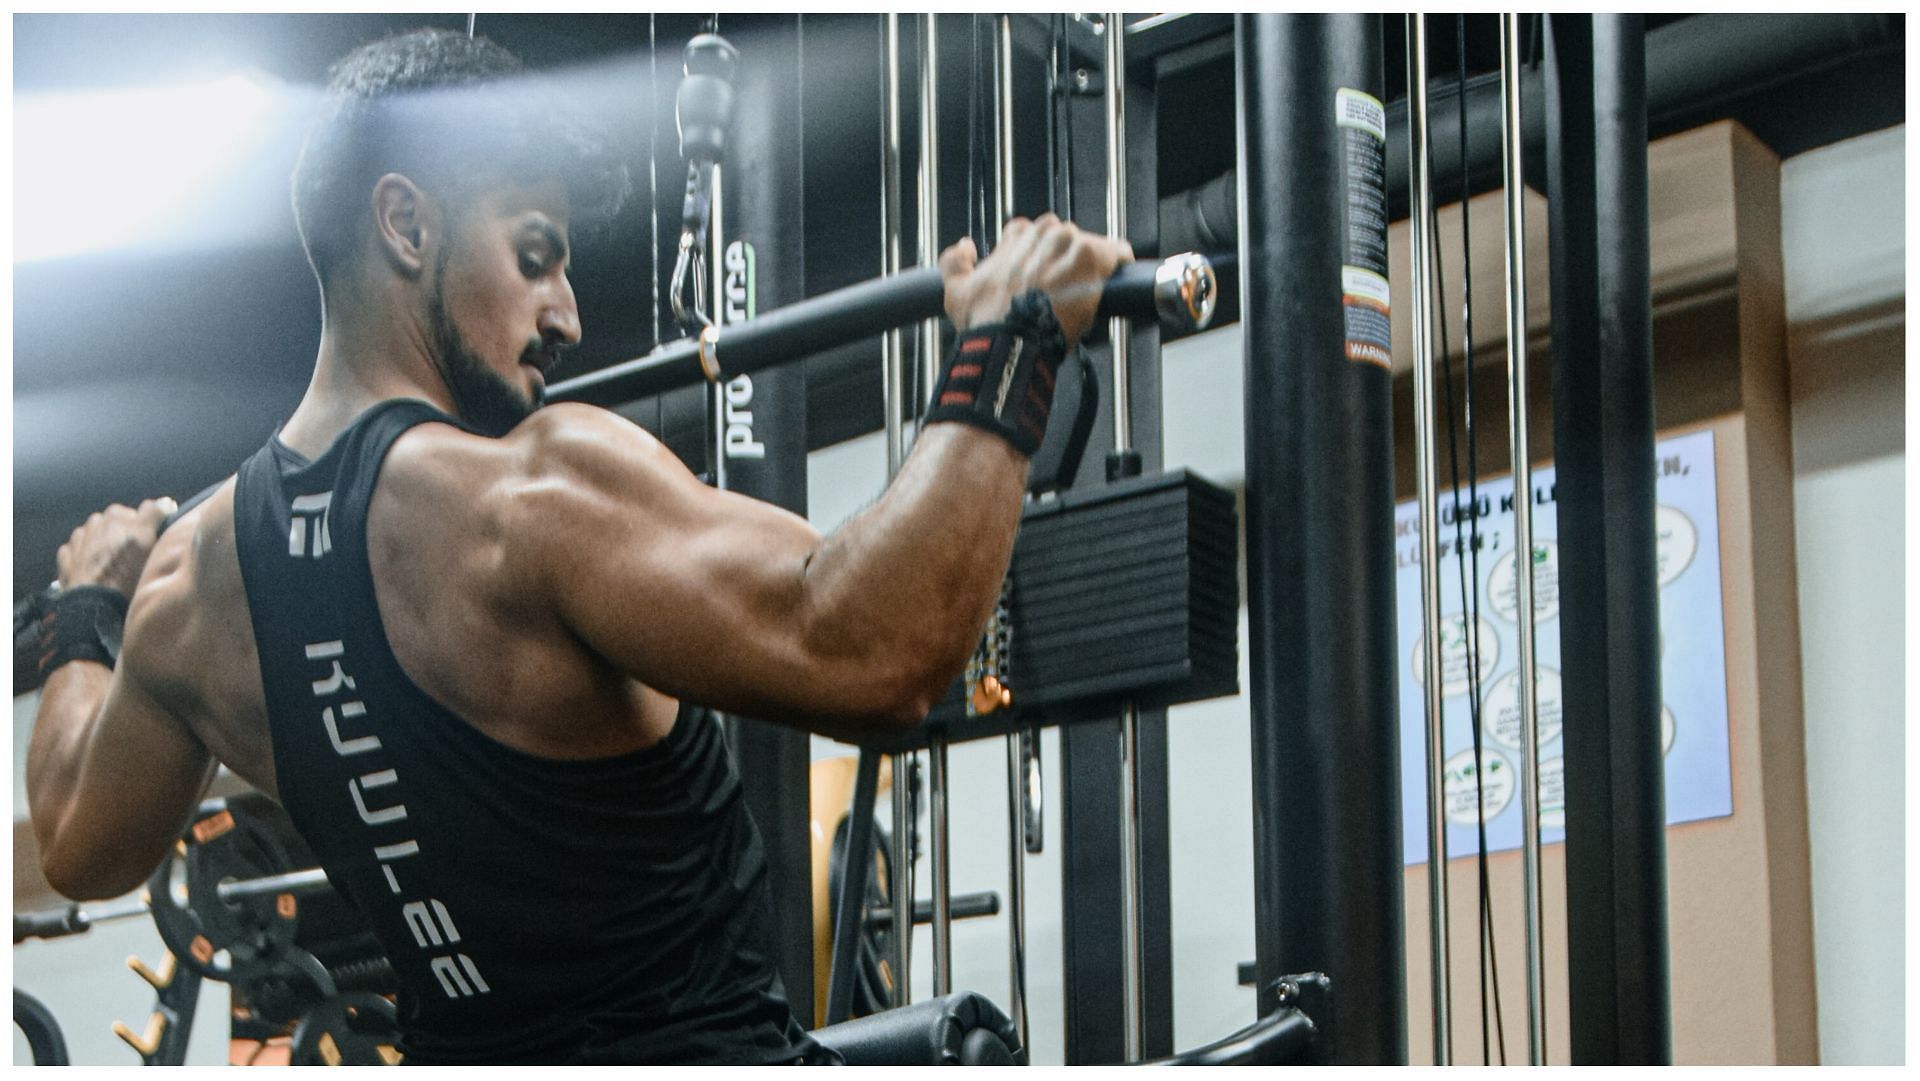 Lat pull-down is the workout to do if you want to develop enviable lats. (Image via Pexels/ Korhan Erdol)